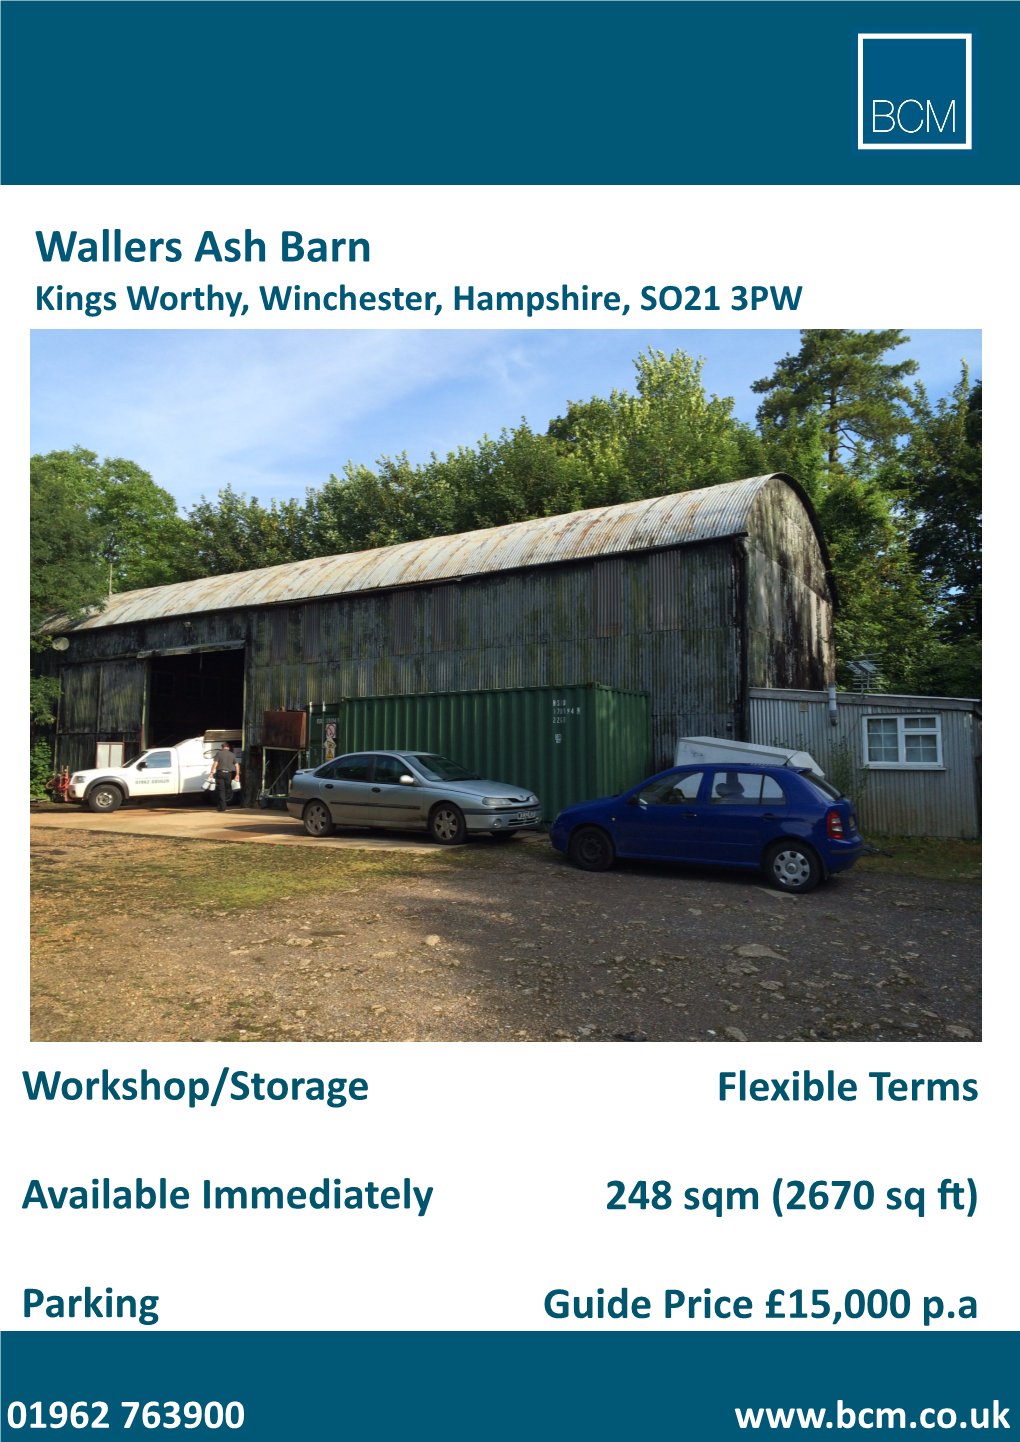 Wallers Ash Barn Kings Worthy, Winchester, Hampshire, SO21 3PW